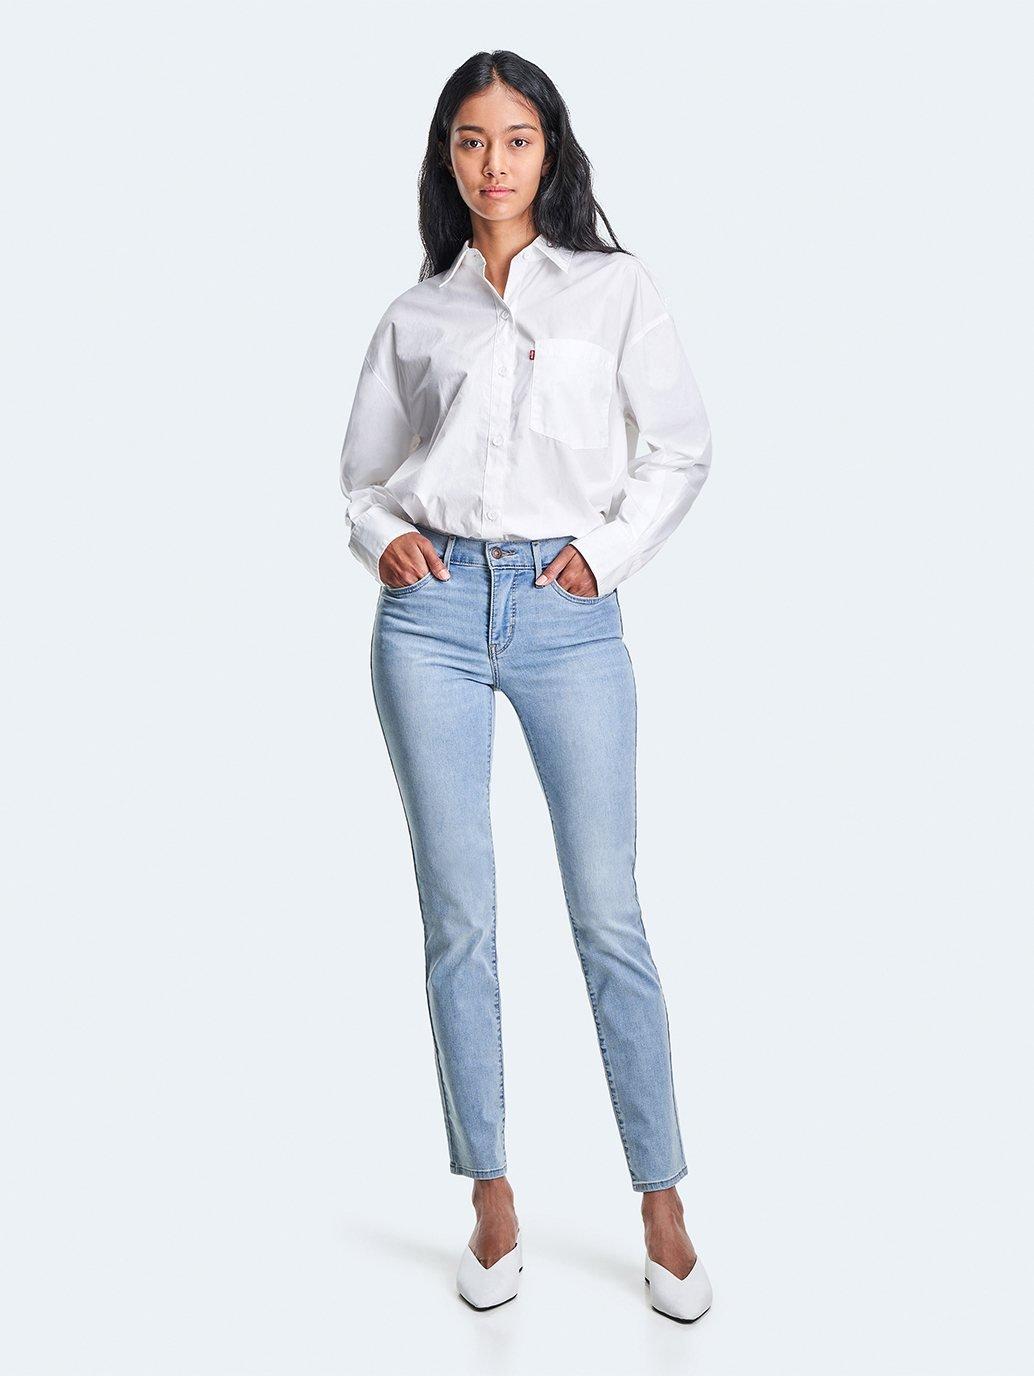 levis malaysia womens 312 shaping slim jeans 196270195 13 Details